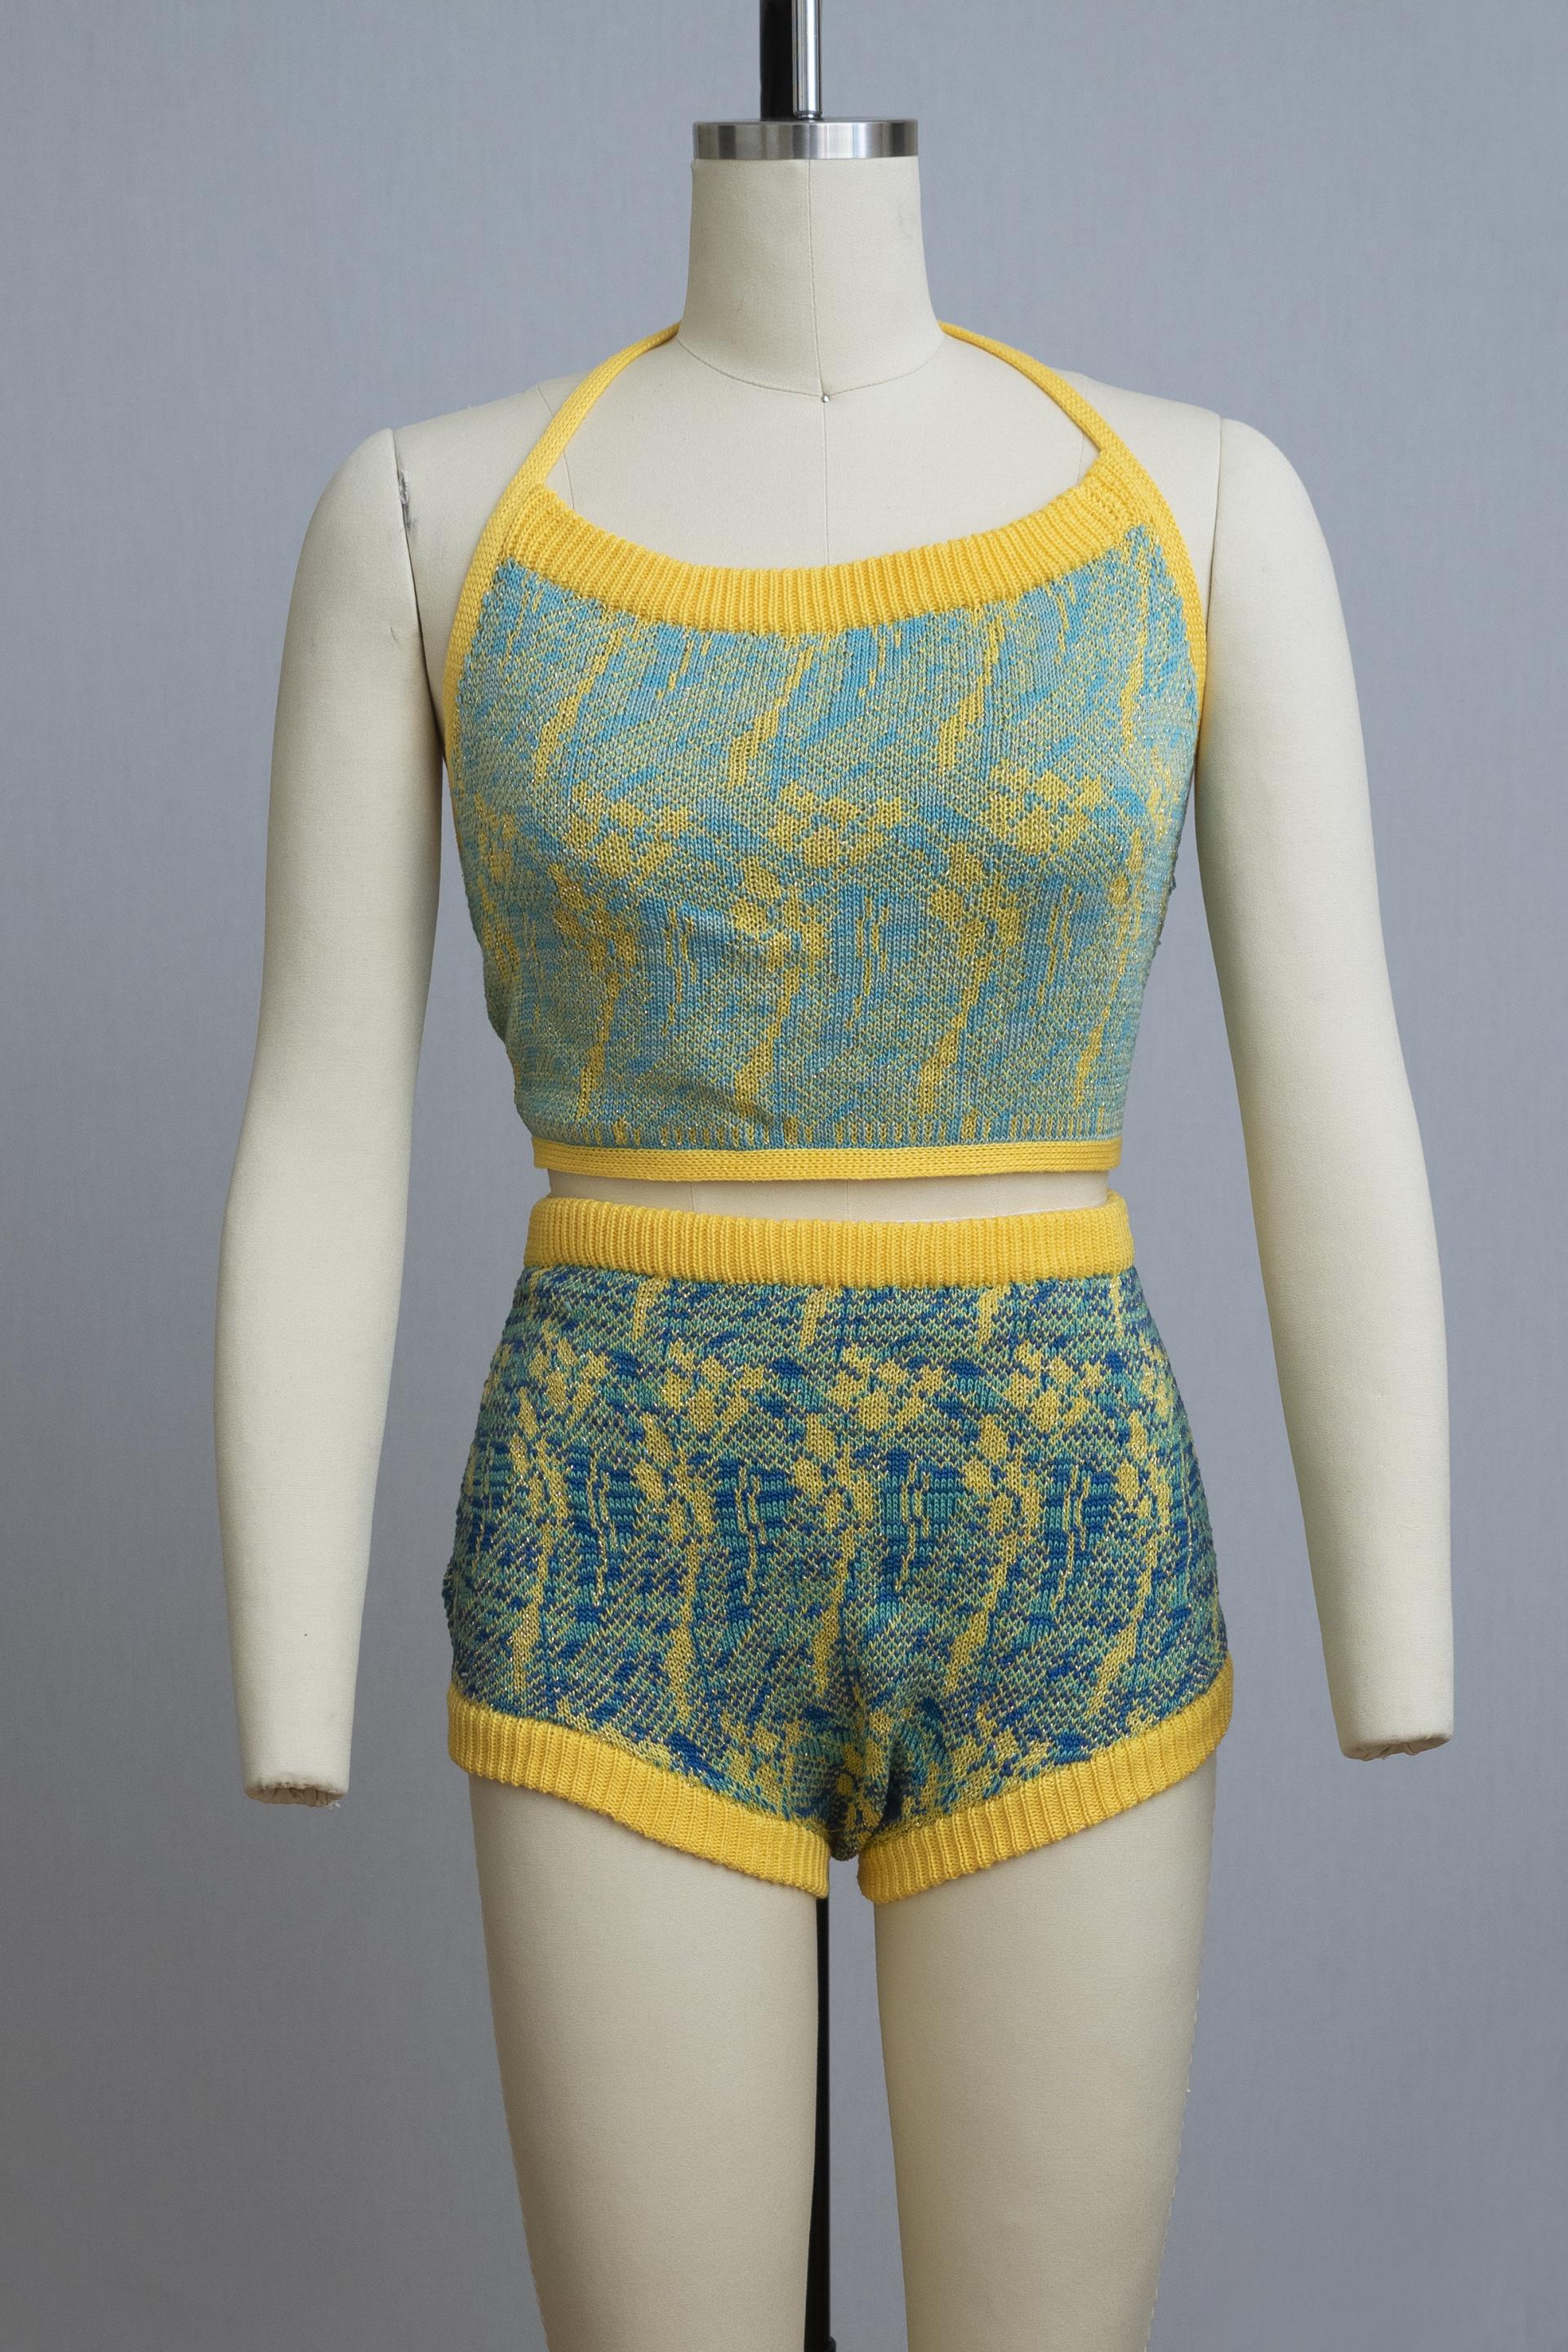 dress form wearing a knit playsuit in blues and yellows